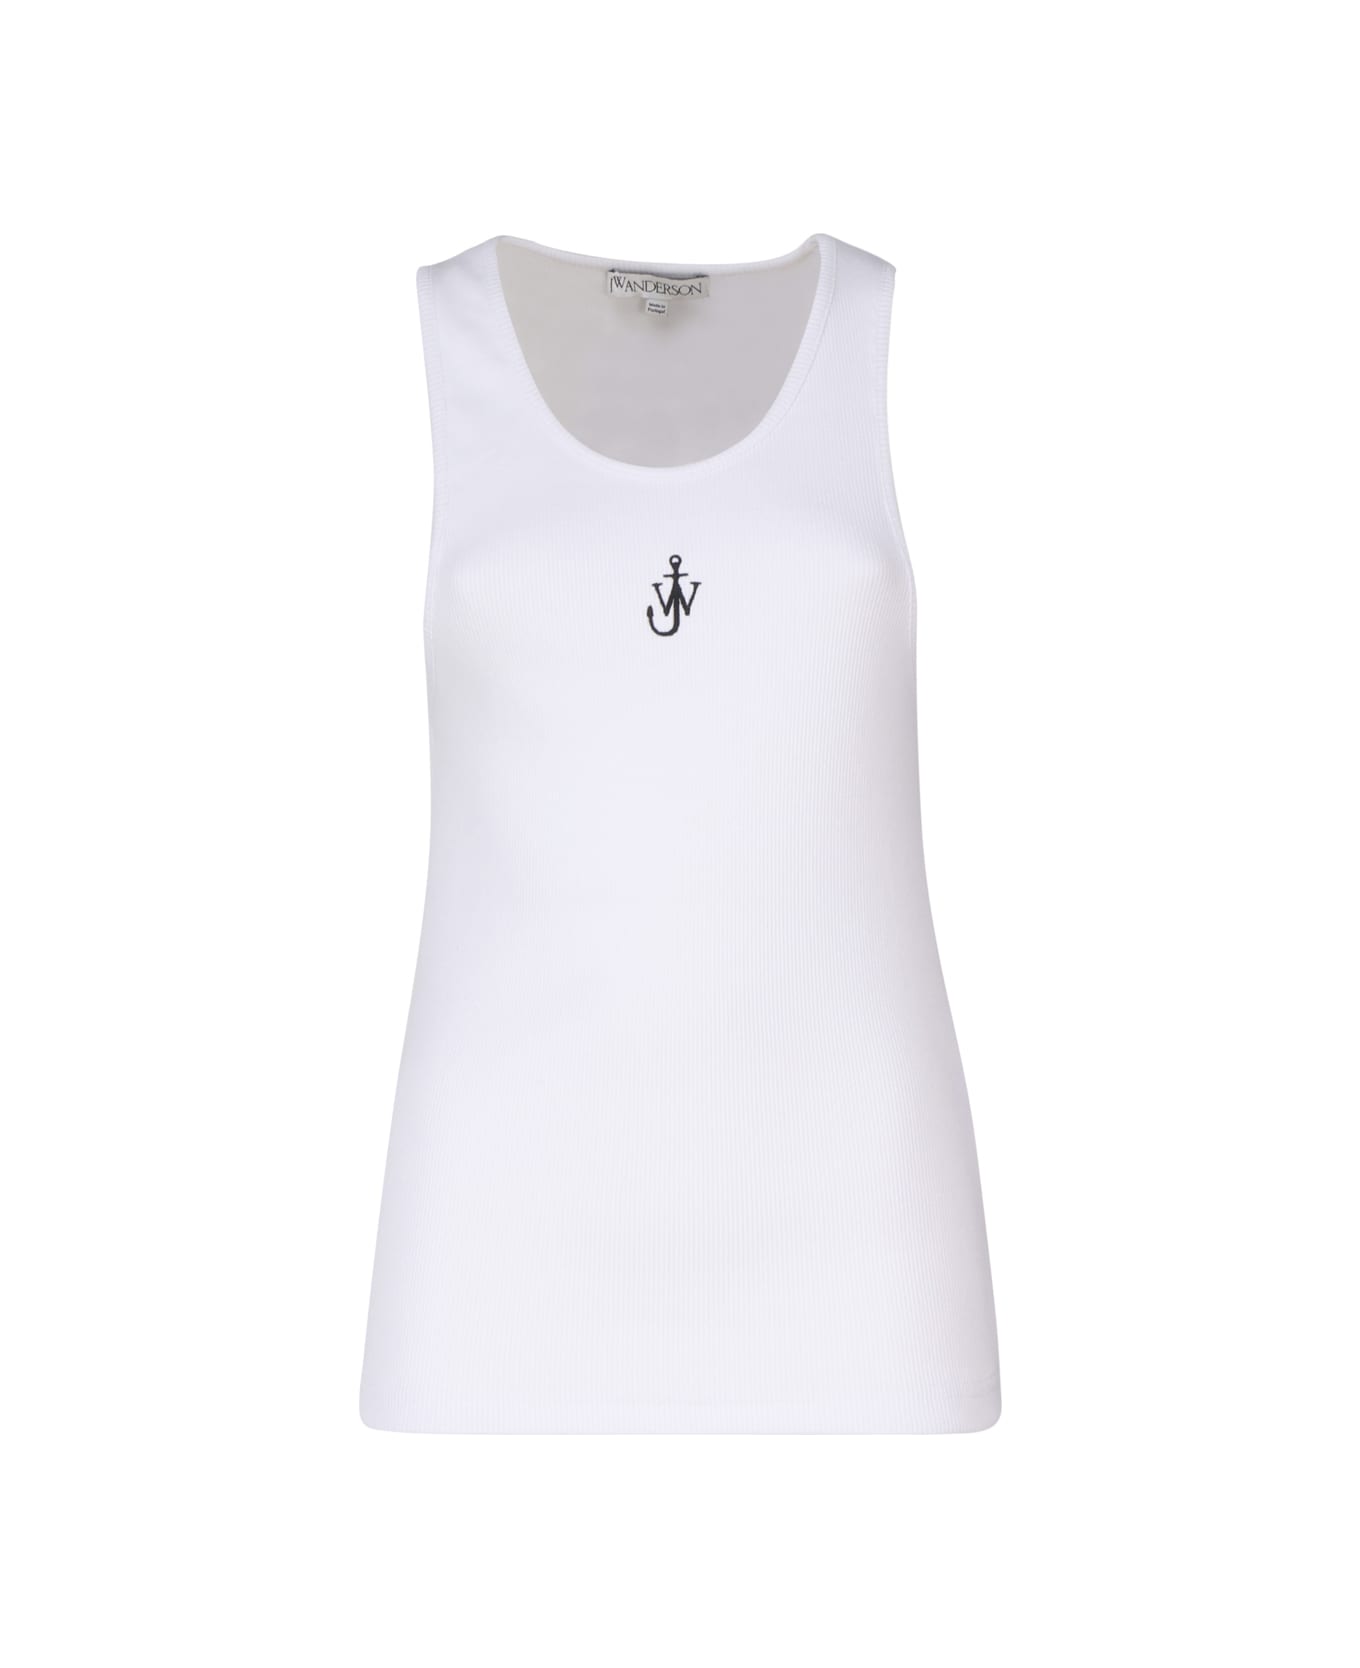 J.W. Anderson Tank Top With Embroidery - White